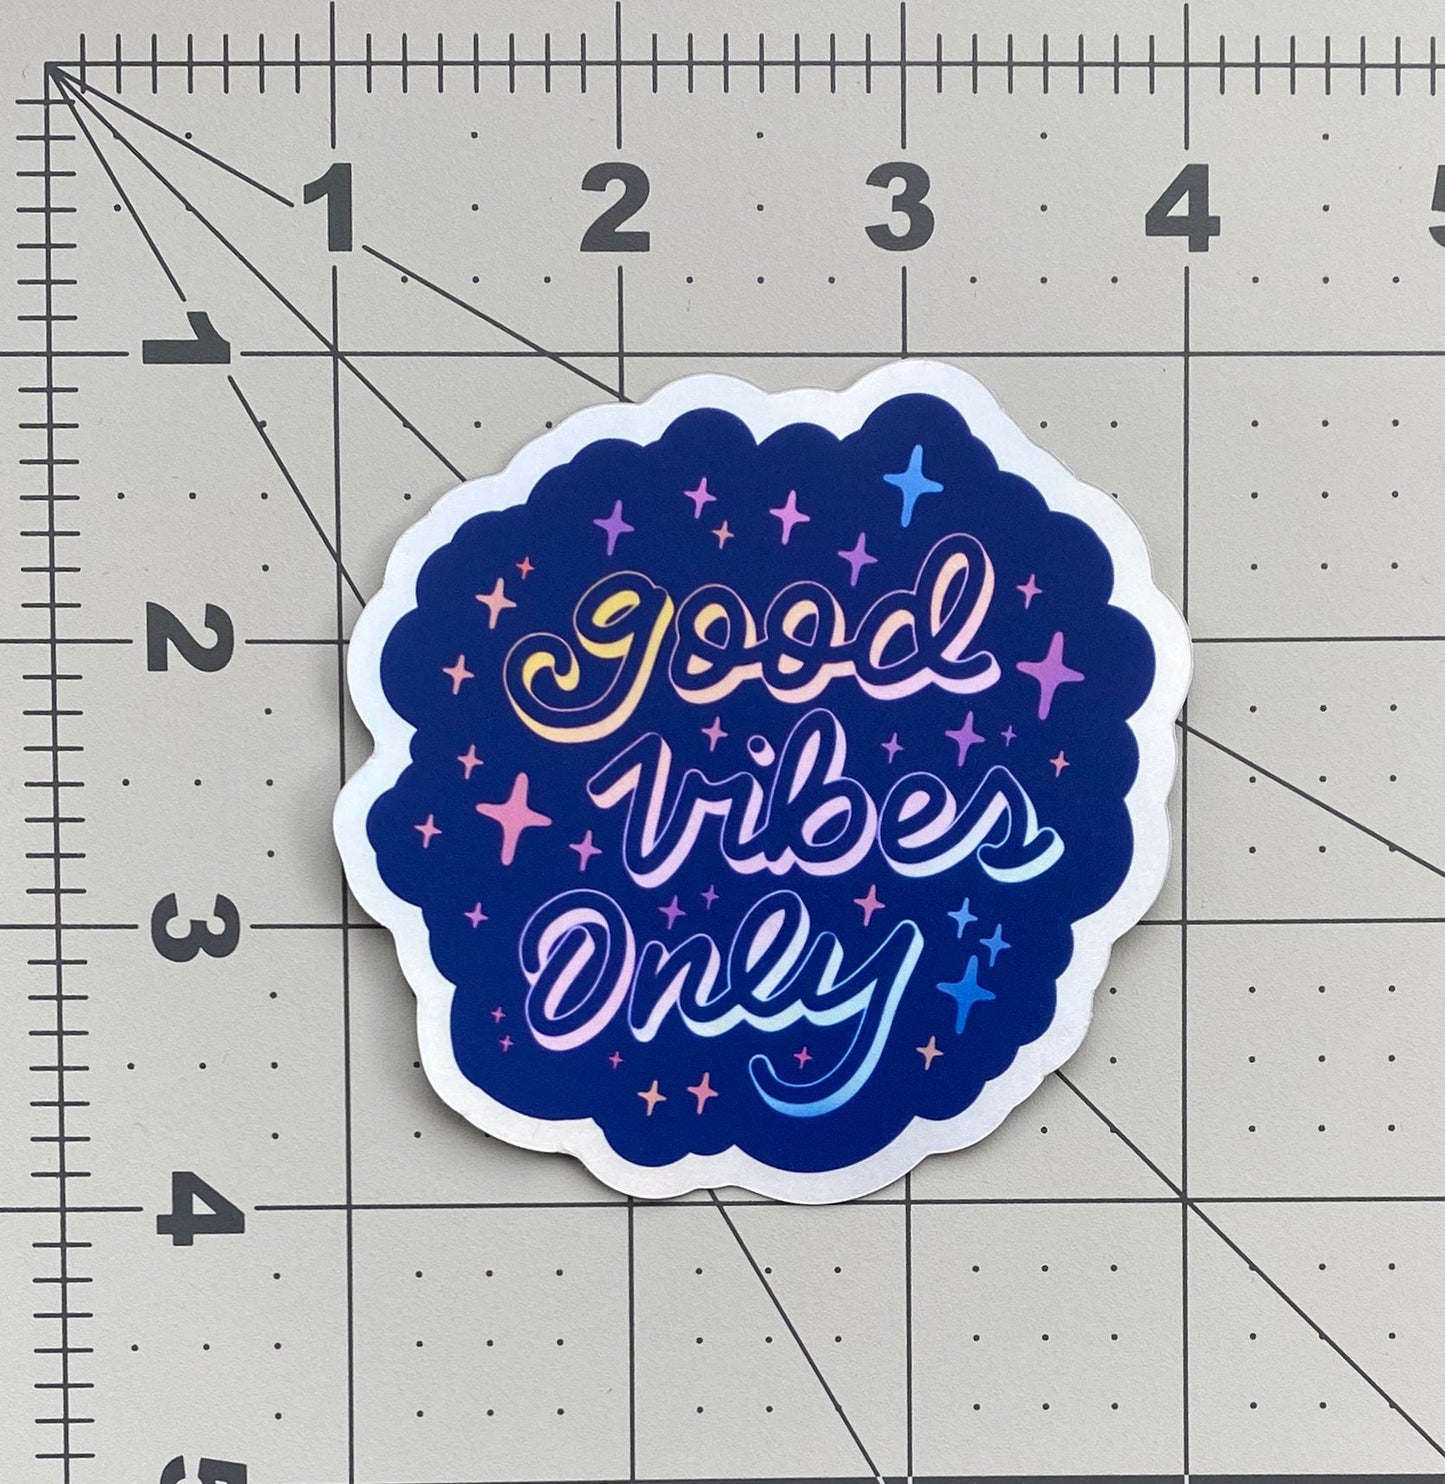 A blue holographic sticker with the words "good vibes only" written in calligraphy and surrounded by rainbow sparkles. The stickers sits on a ruled background to show size.